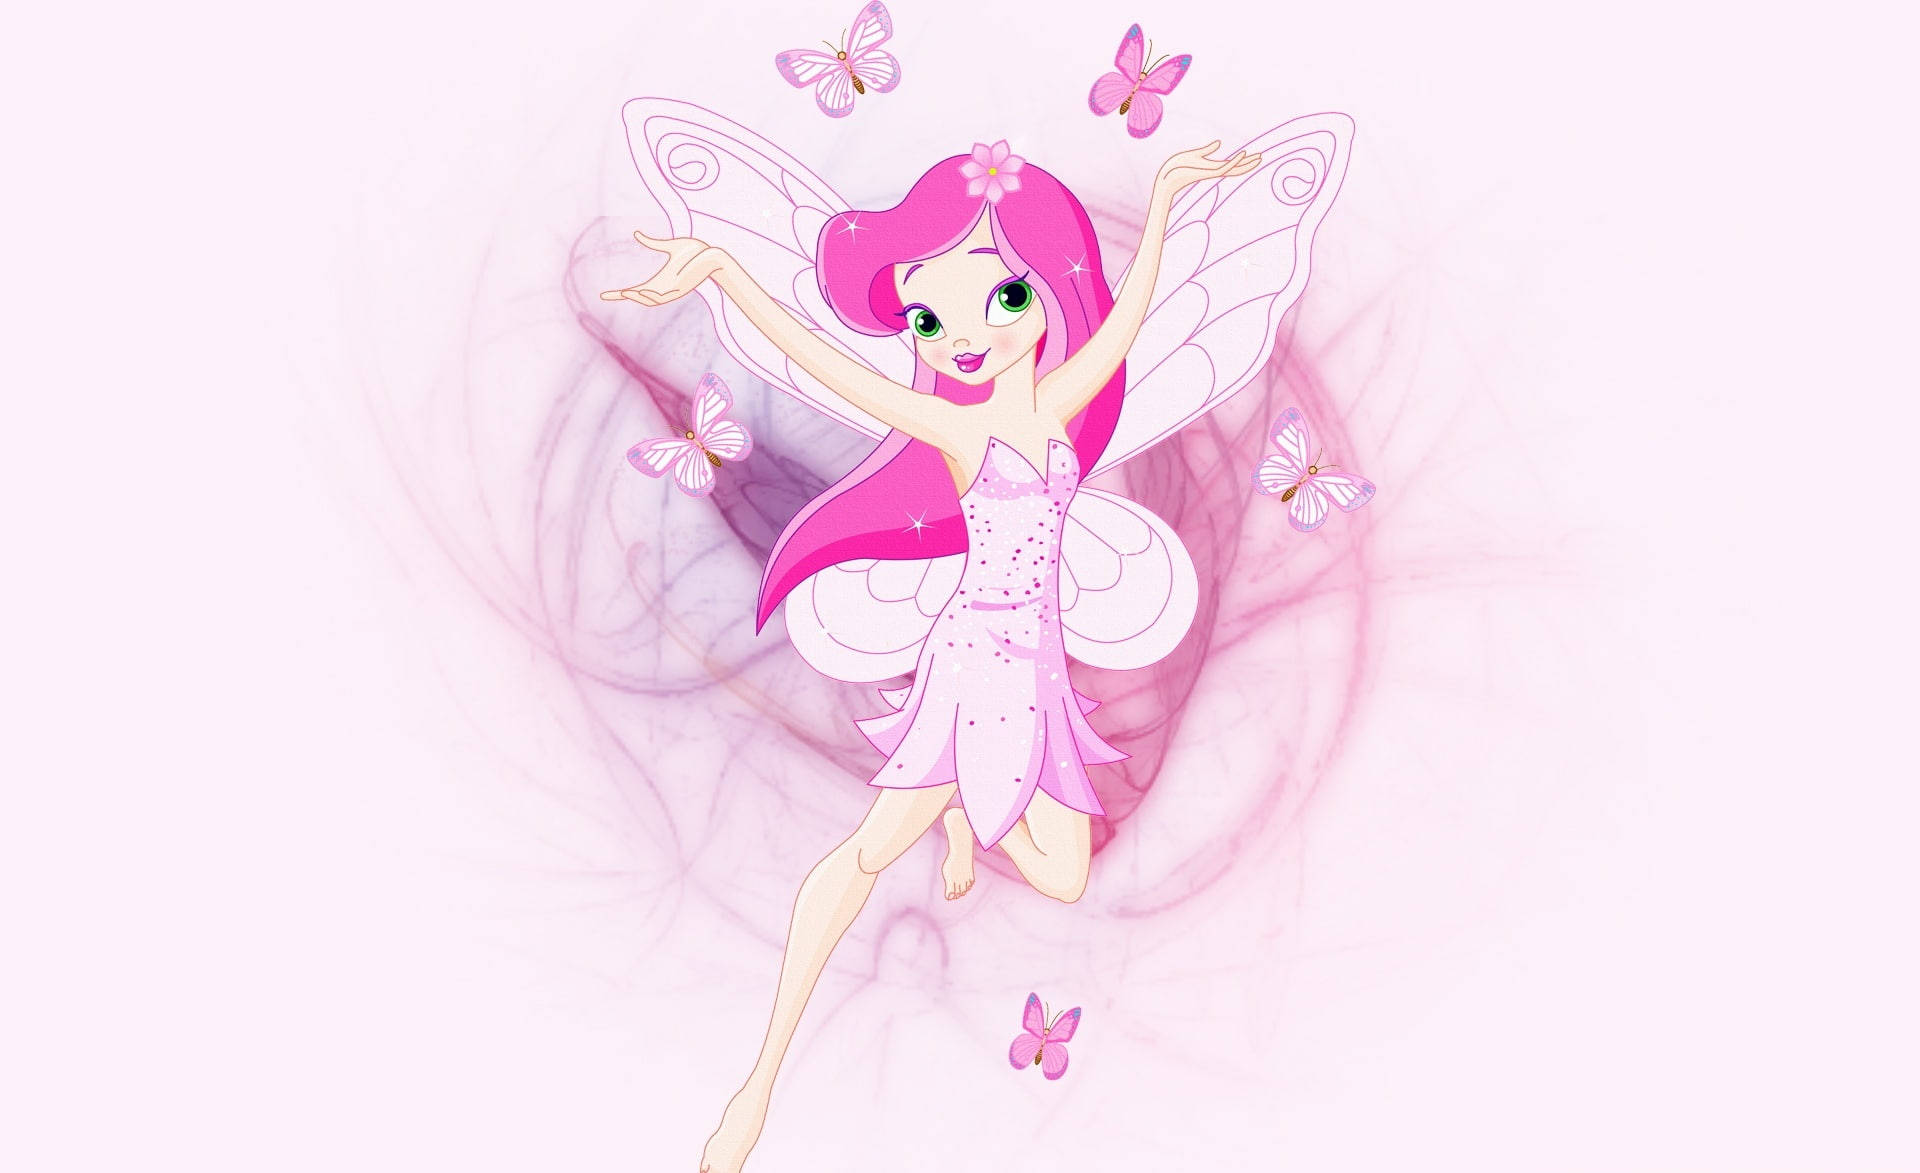 Free Pink Fairy Wallpaper Downloads, [100+] Pink Fairy Wallpapers for FREE  